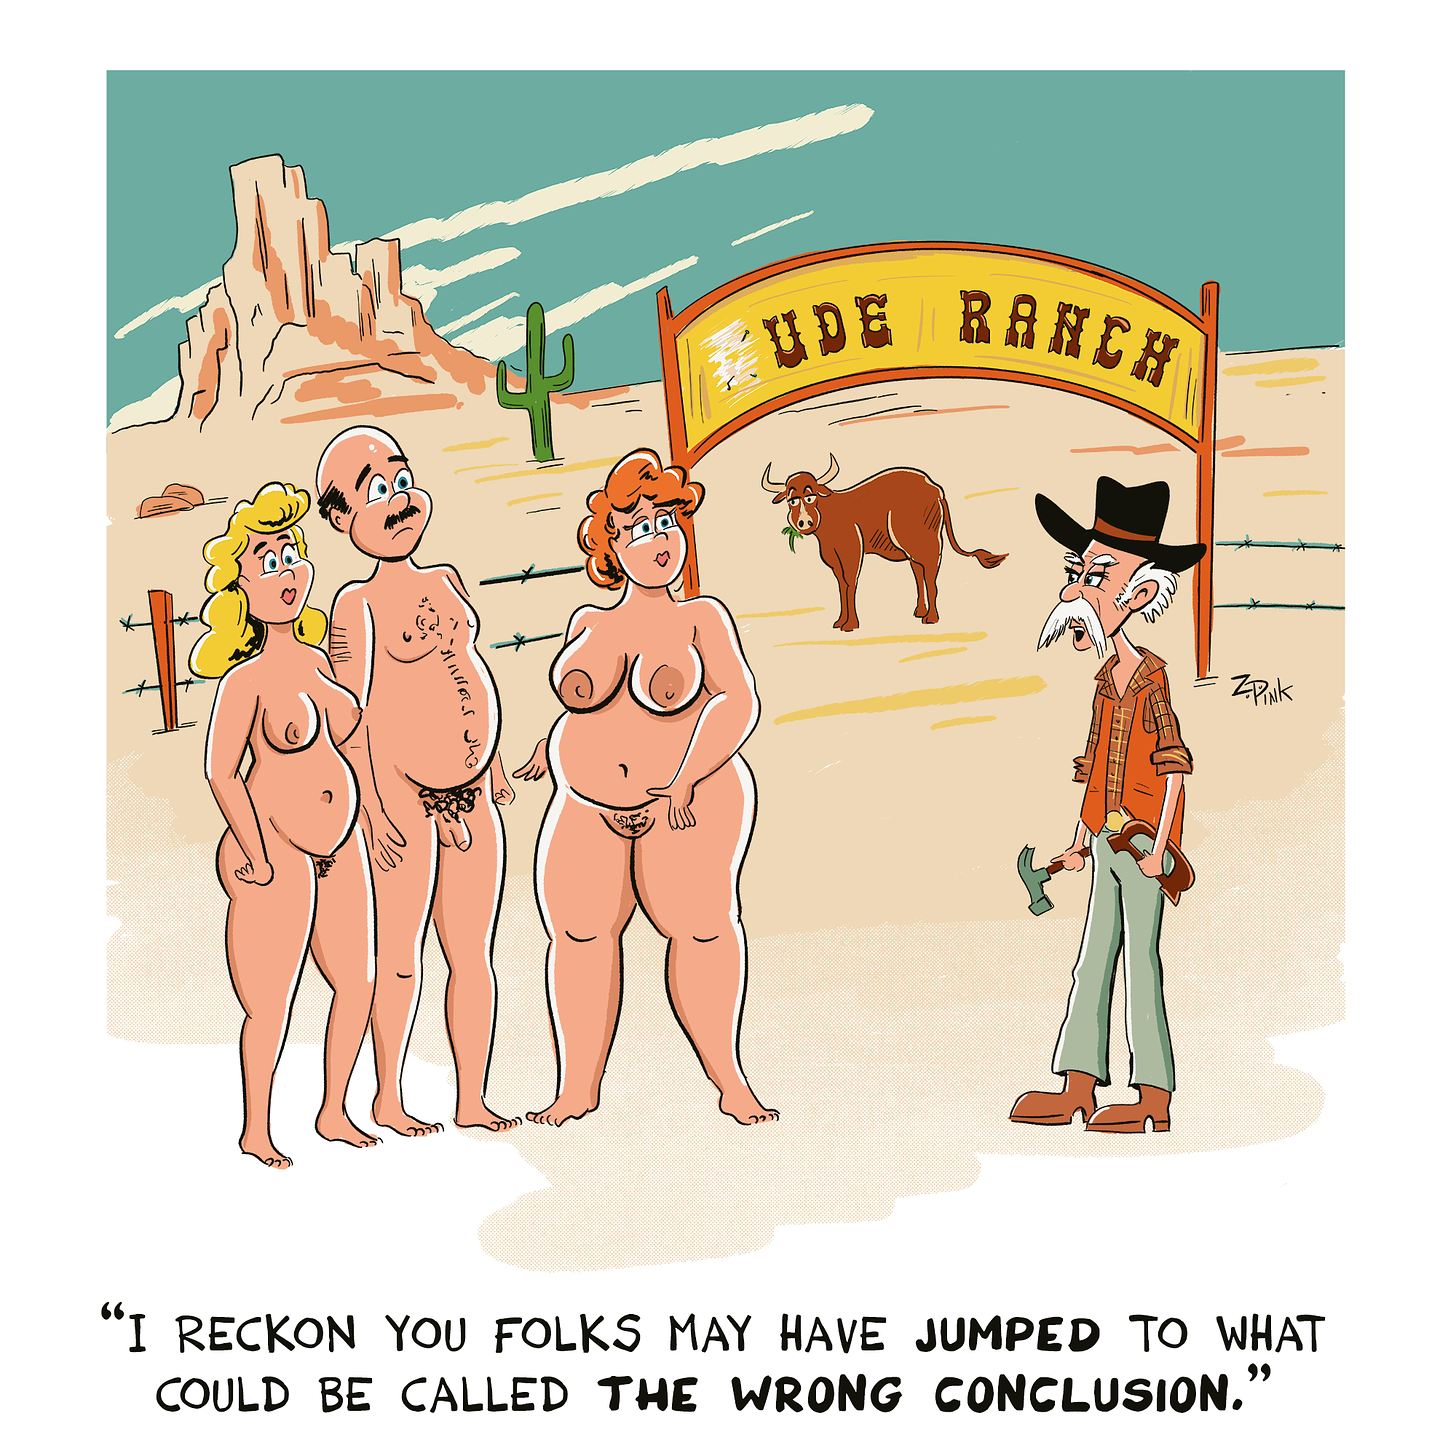 Two nude women and a nude man are standing outside of a cattle ranch in the American west. A sign reading “ude ranch” is visible in the background. A grizzledlooking cowboy holding a hammer and a large letter D in the same font as the sign is speaking to them, saying “I Reckon you folks may have jumped to what could be called the wrong conclusion”